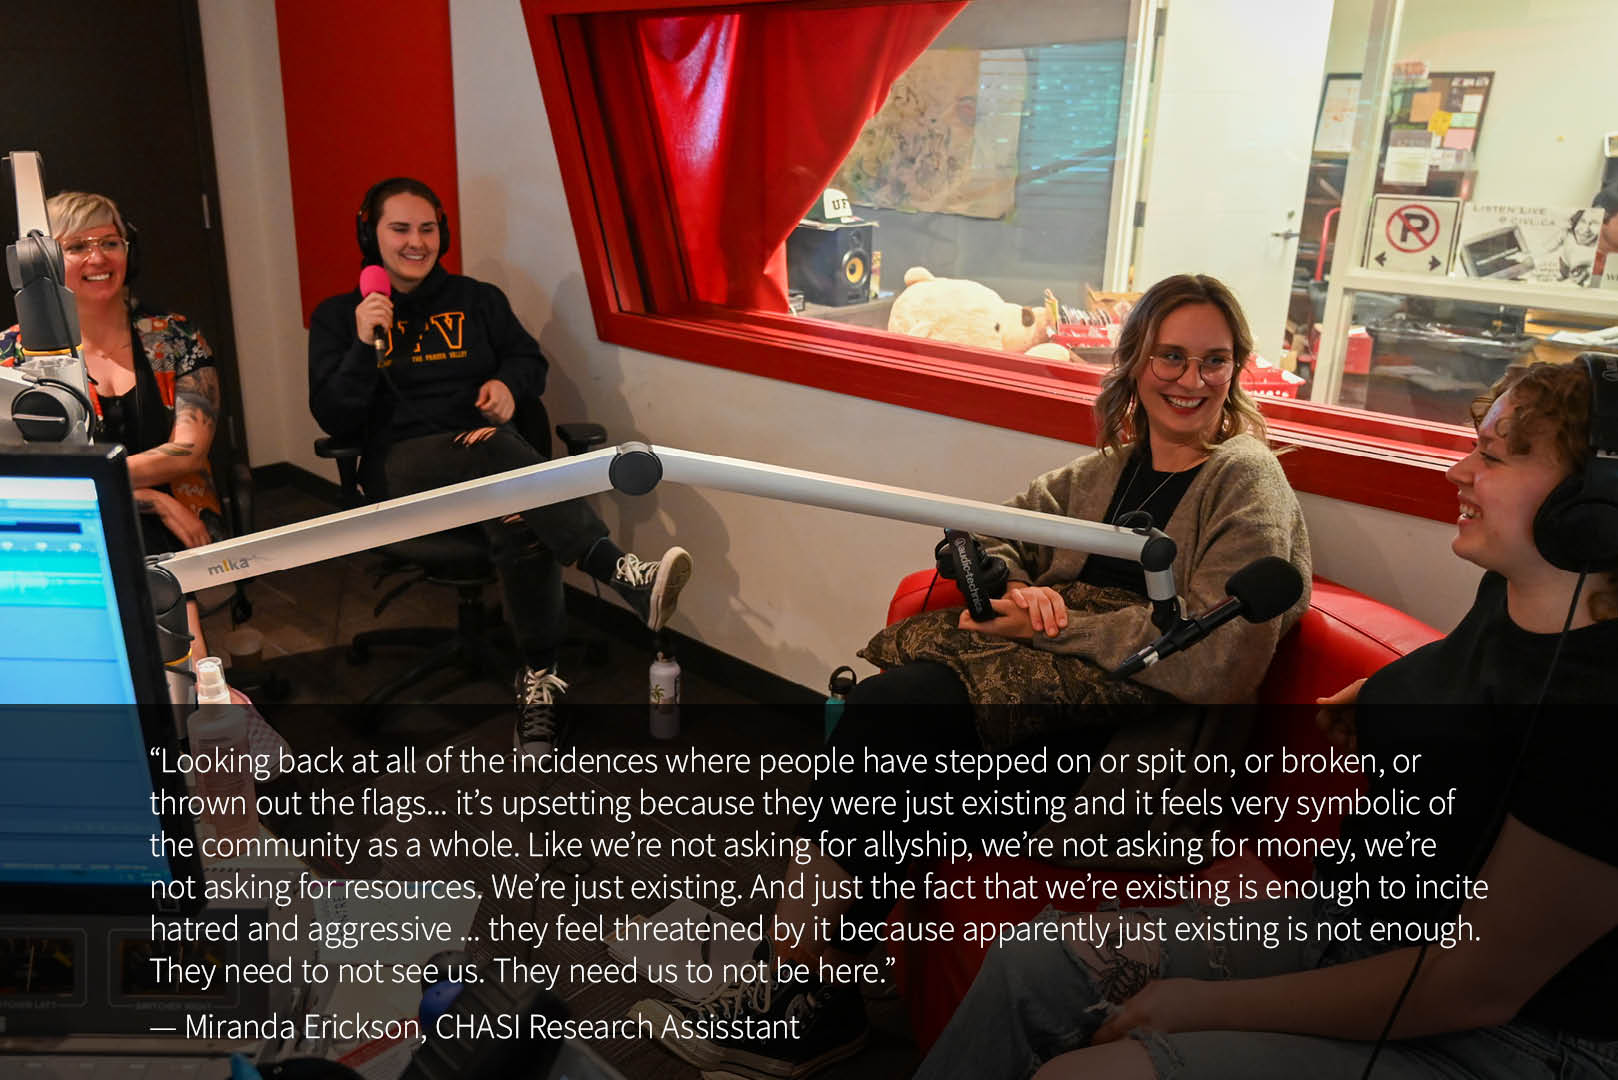 Four women sit in the CIVL Radio studio with headhphones on and microphones in front of them. A quote from Miranda Erickson reads: “Looking back at all of the incidences where people have stepped on or spit on, or broken, or thrown out the flags... it’s upsetting because they were just existing and it feels very symbolic of the community as a whole. Like we’re not asking for allyship, we’re not asking for money, we’re not asking for resources. We’re just existing. And just the fact that we’re existing is enough to incite hatred and aggressive ... they feel threatened by it because apparently just existing is not enough. They need to not see us. They need us to not be here.”